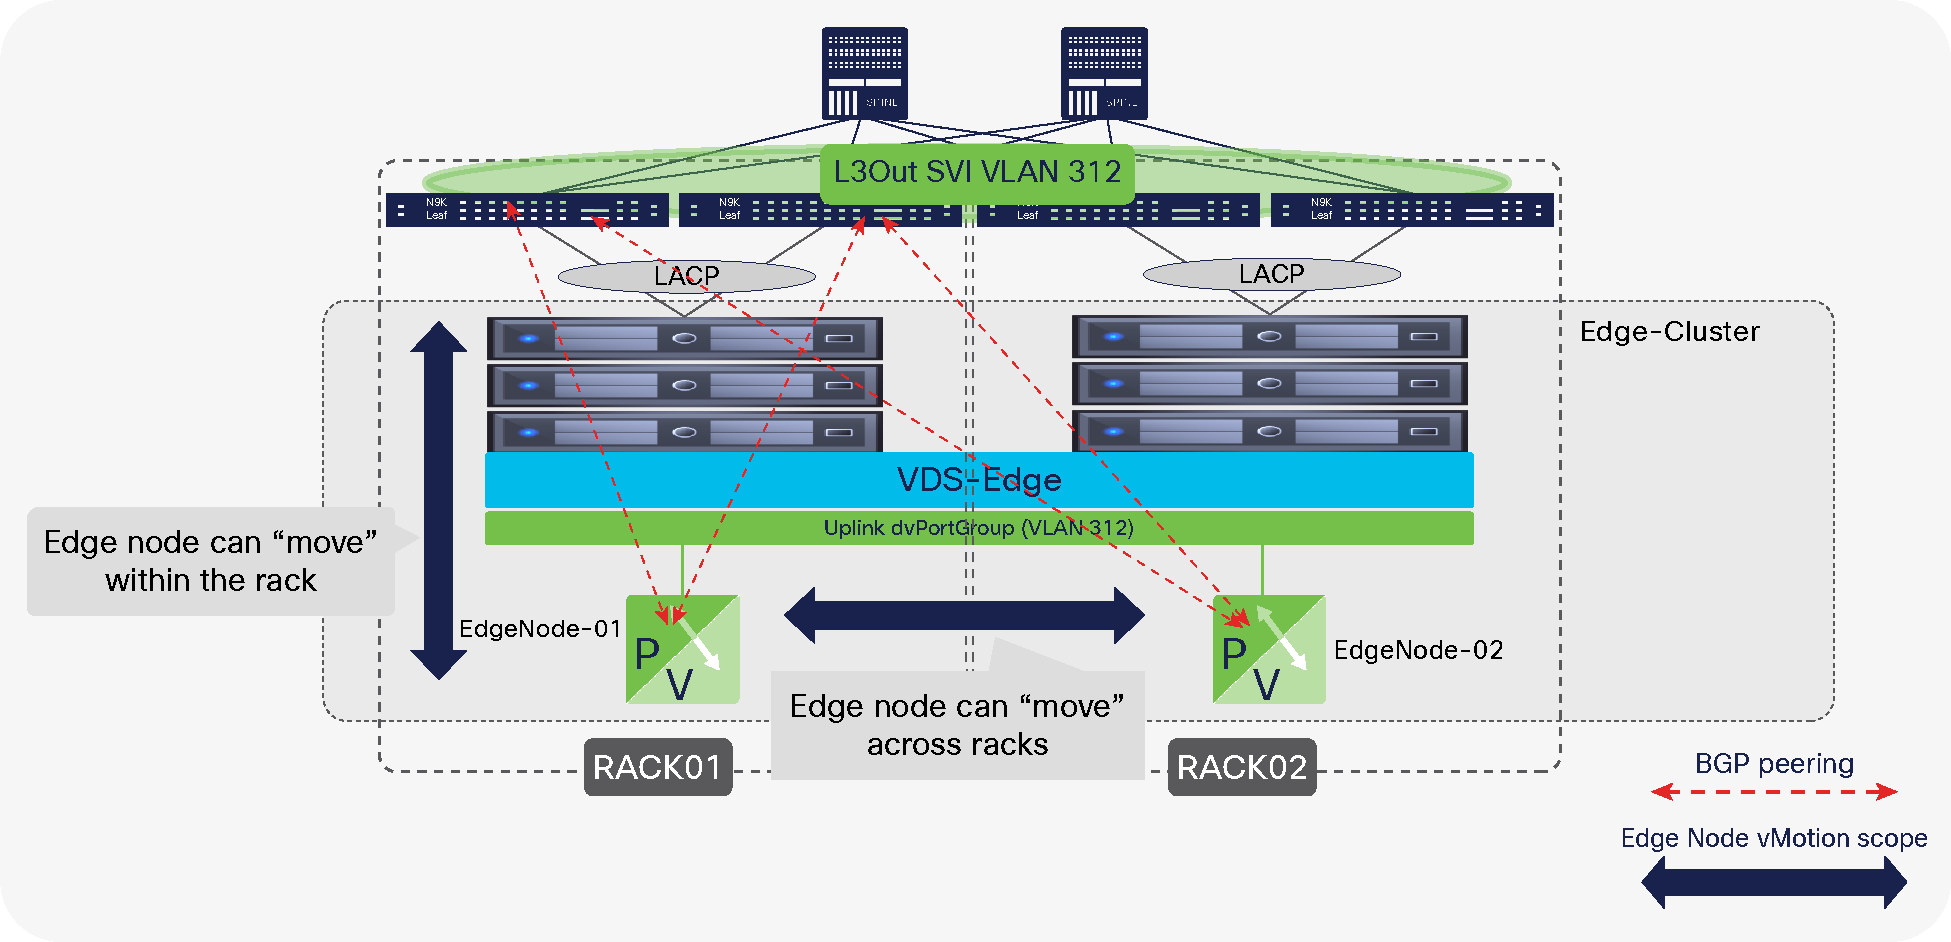 Edge nodes migrated to another host without impacting the BGP peering status or the routed traffic